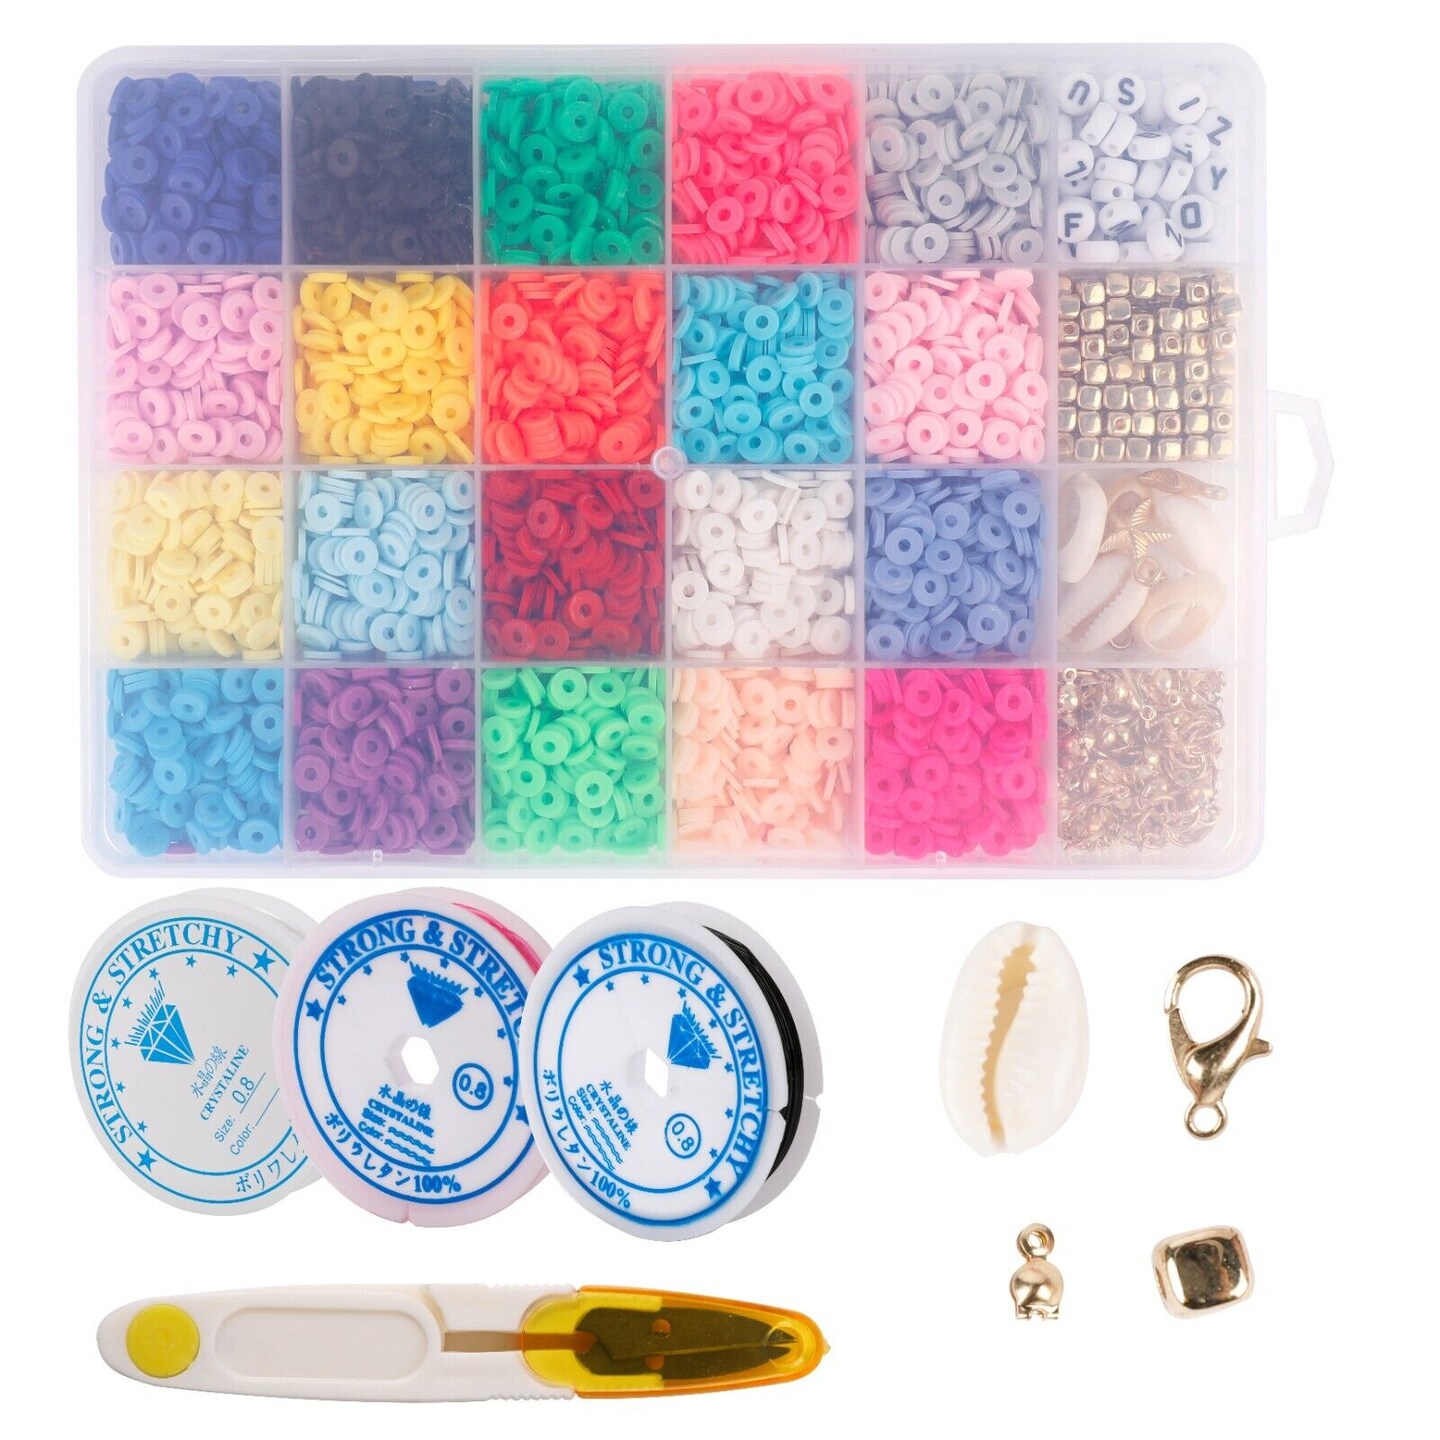 Kitcheniva Colored Polymer Clay Bead Kit 4270 Pieces